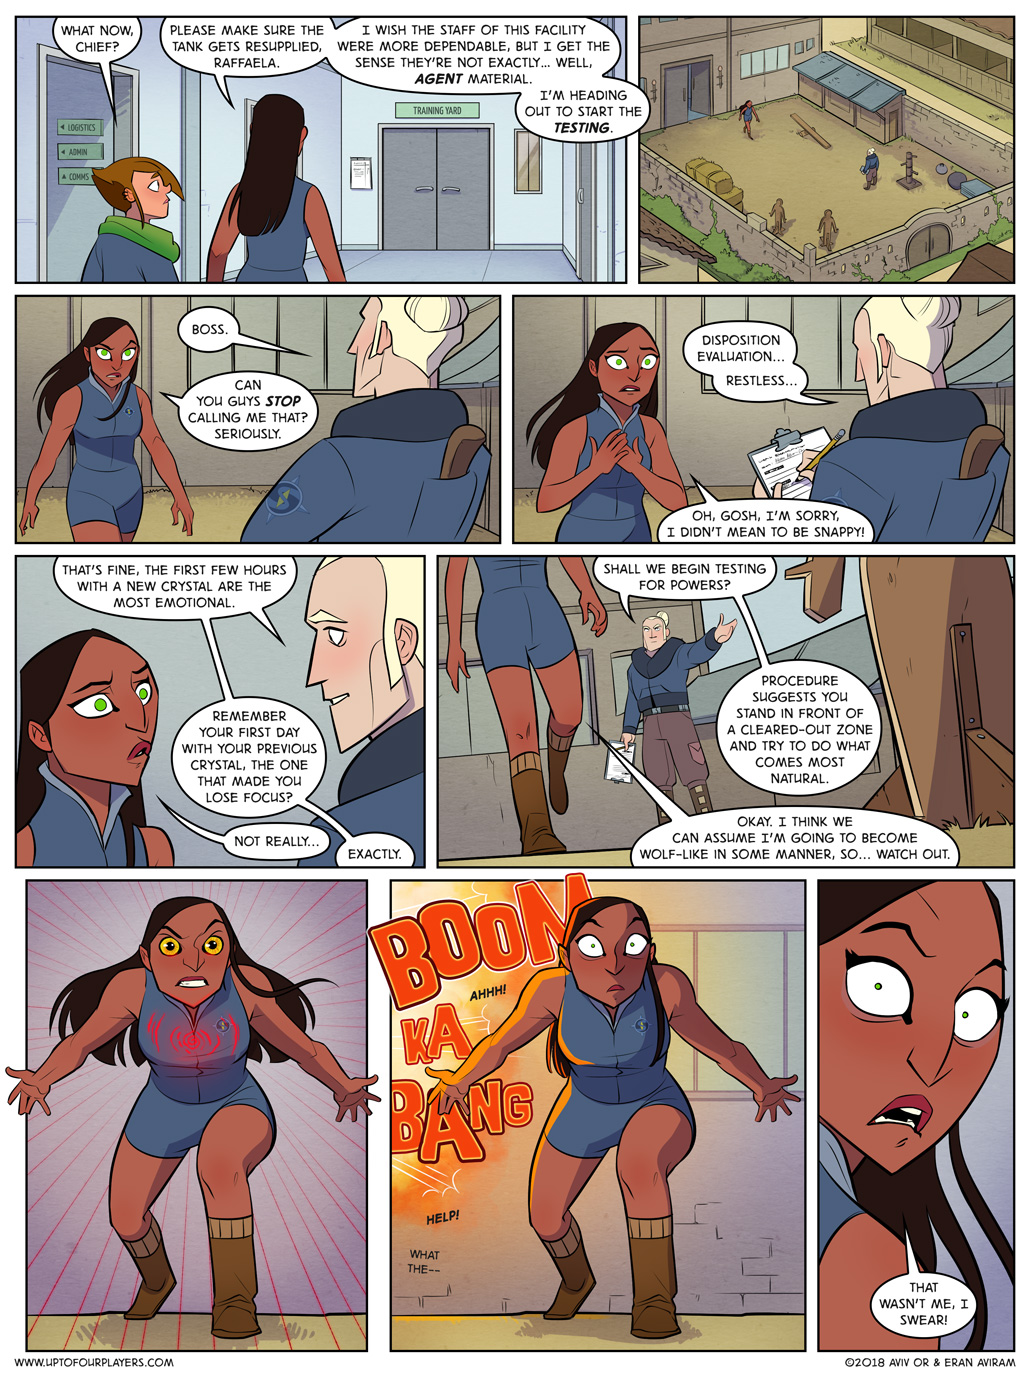 Heart of Stone – Page 3